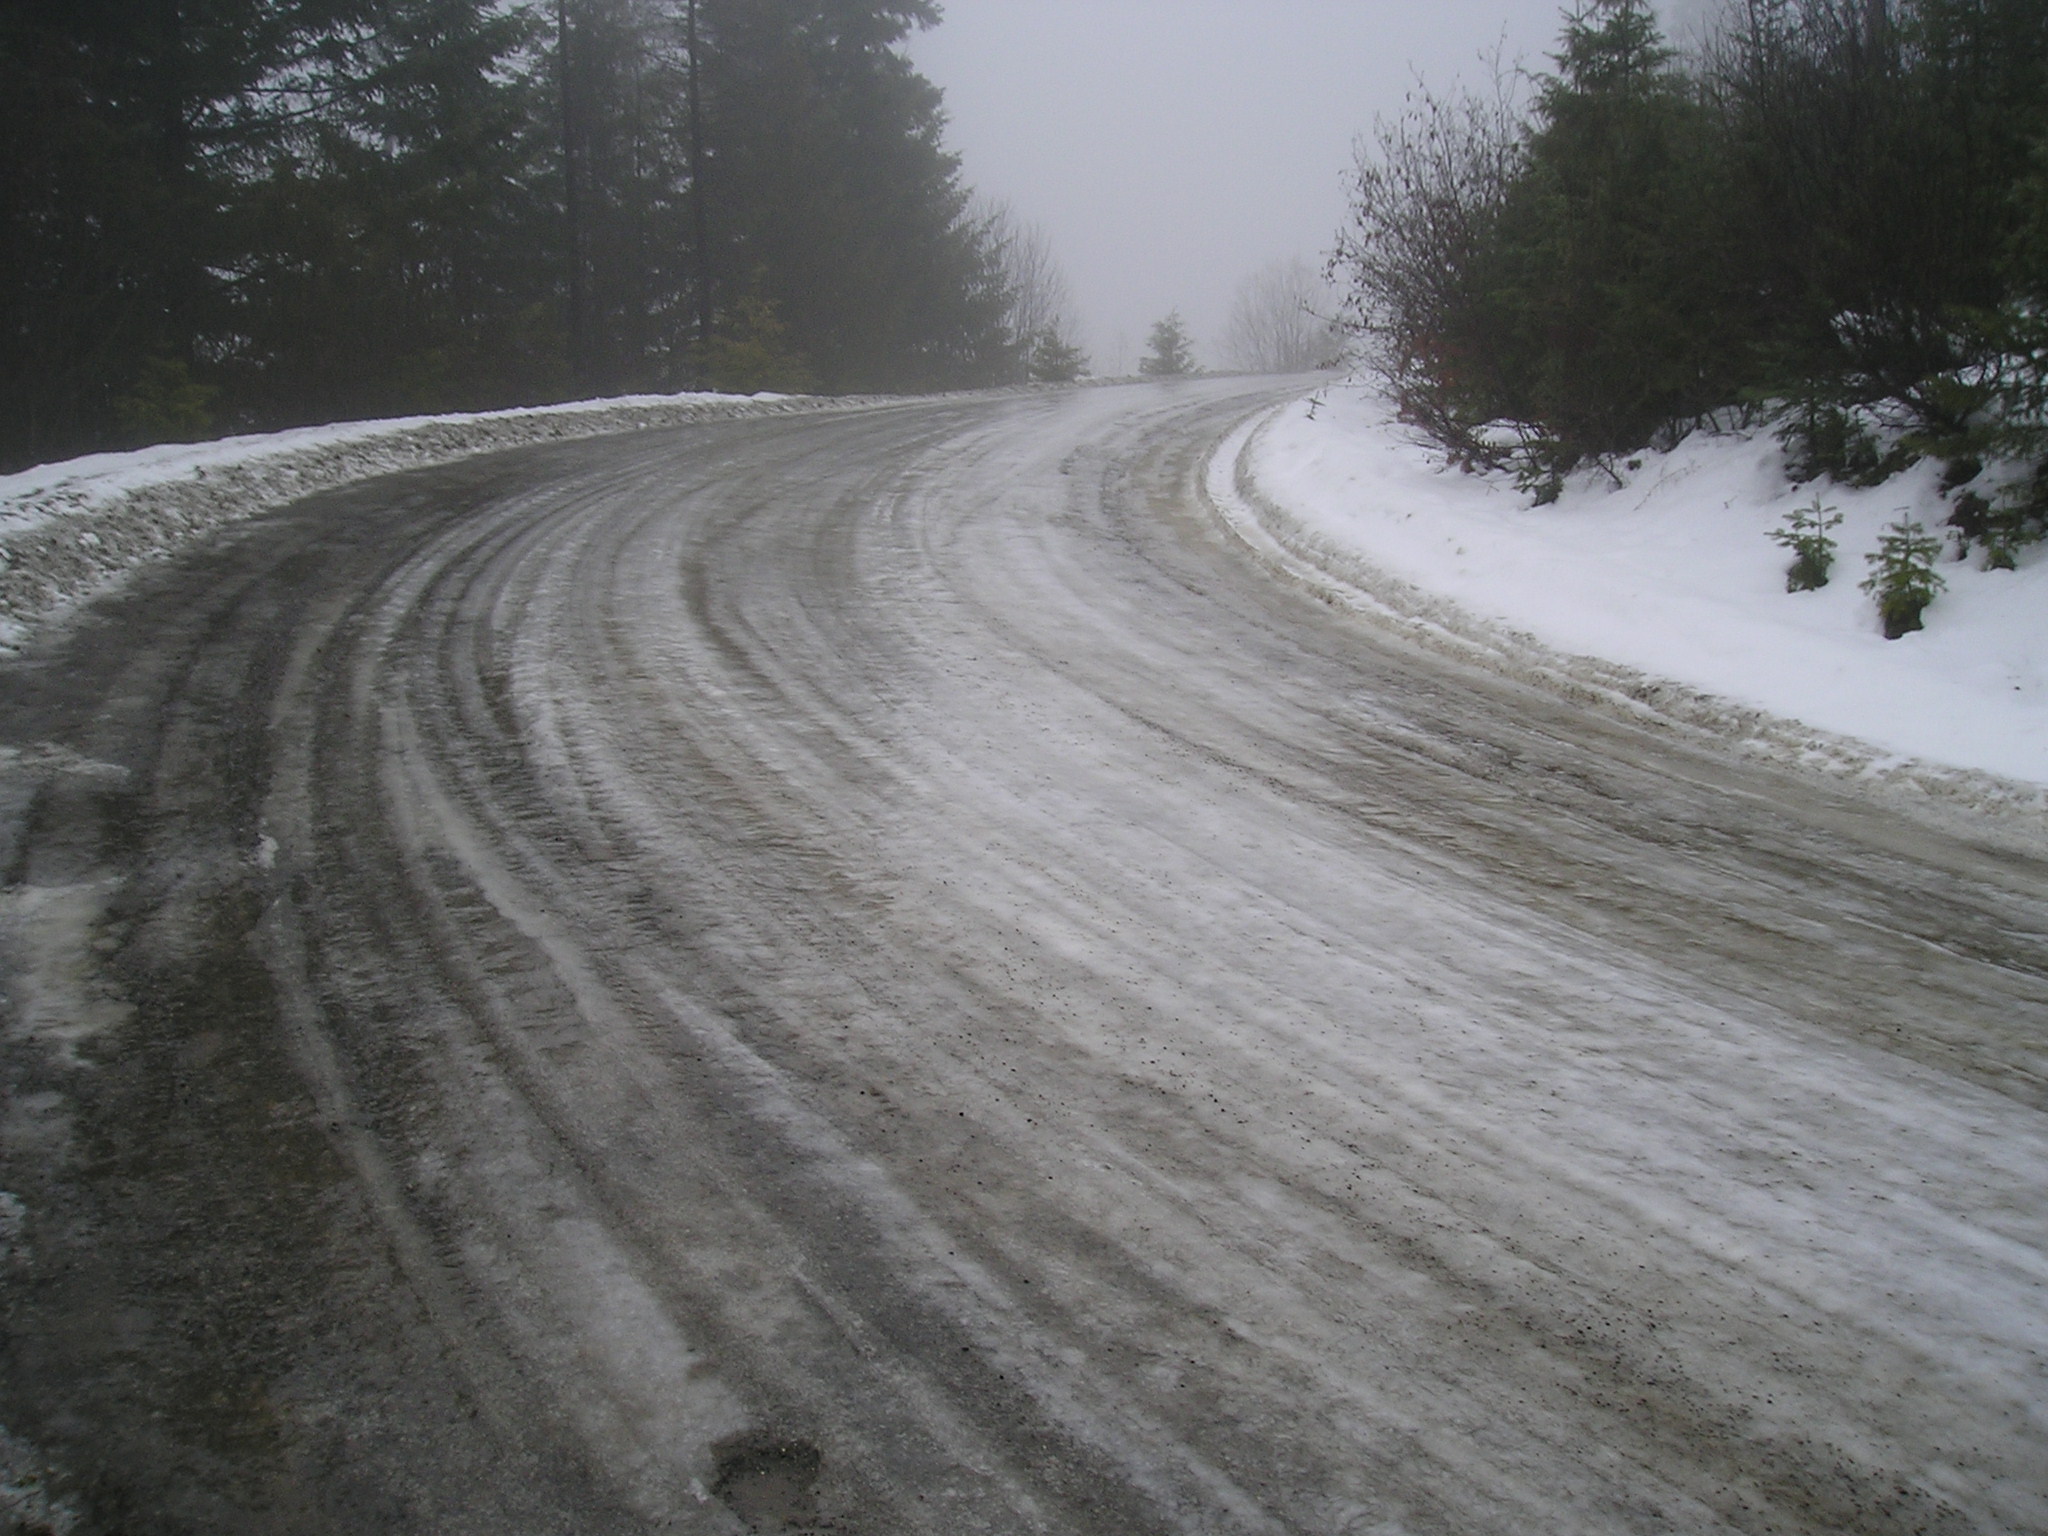 Real ice roads, just about flew off.